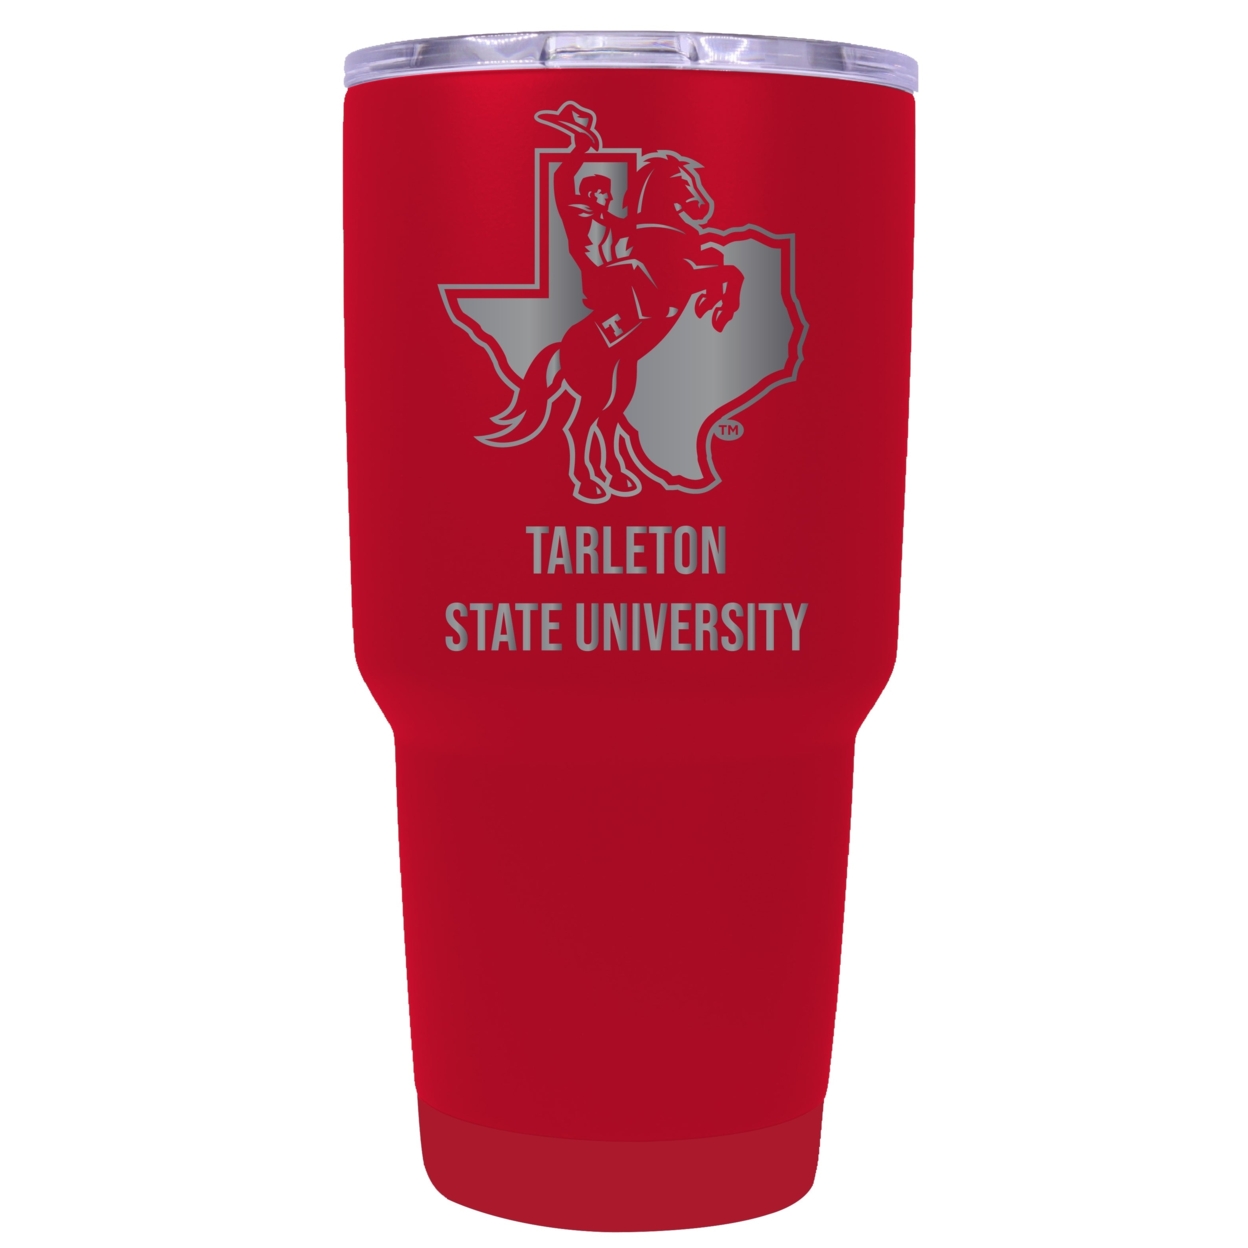 Tarleton State University 24 Oz Laser Engraved Stainless Steel Insulated Tumbler - Choose Your Color. - Red